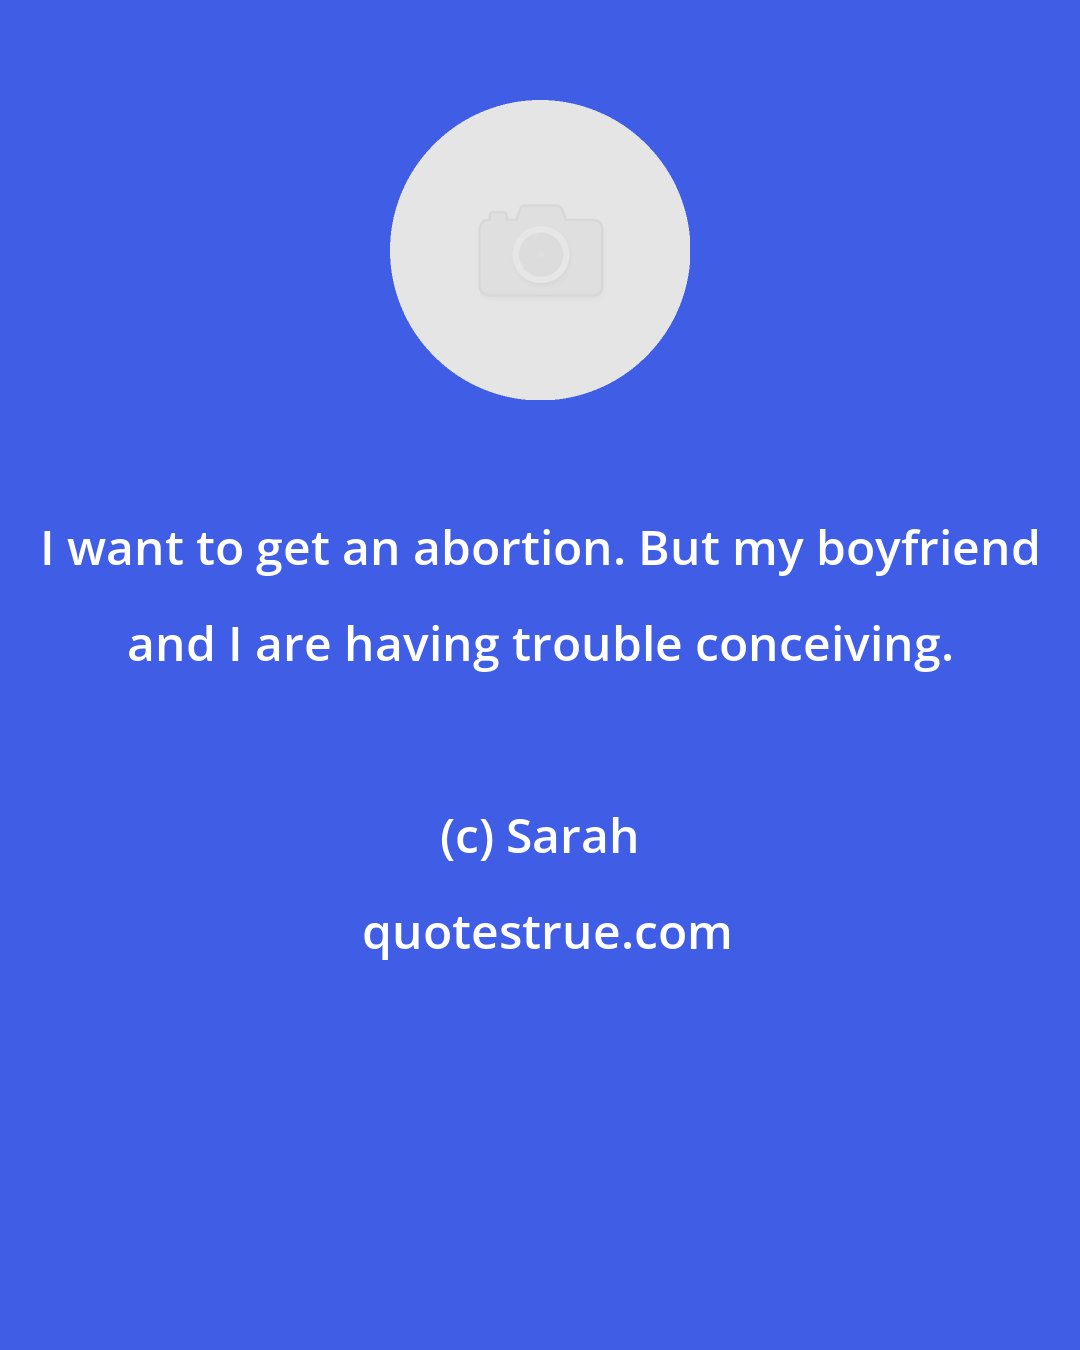 Sarah: I want to get an abortion. But my boyfriend and I are having trouble conceiving.